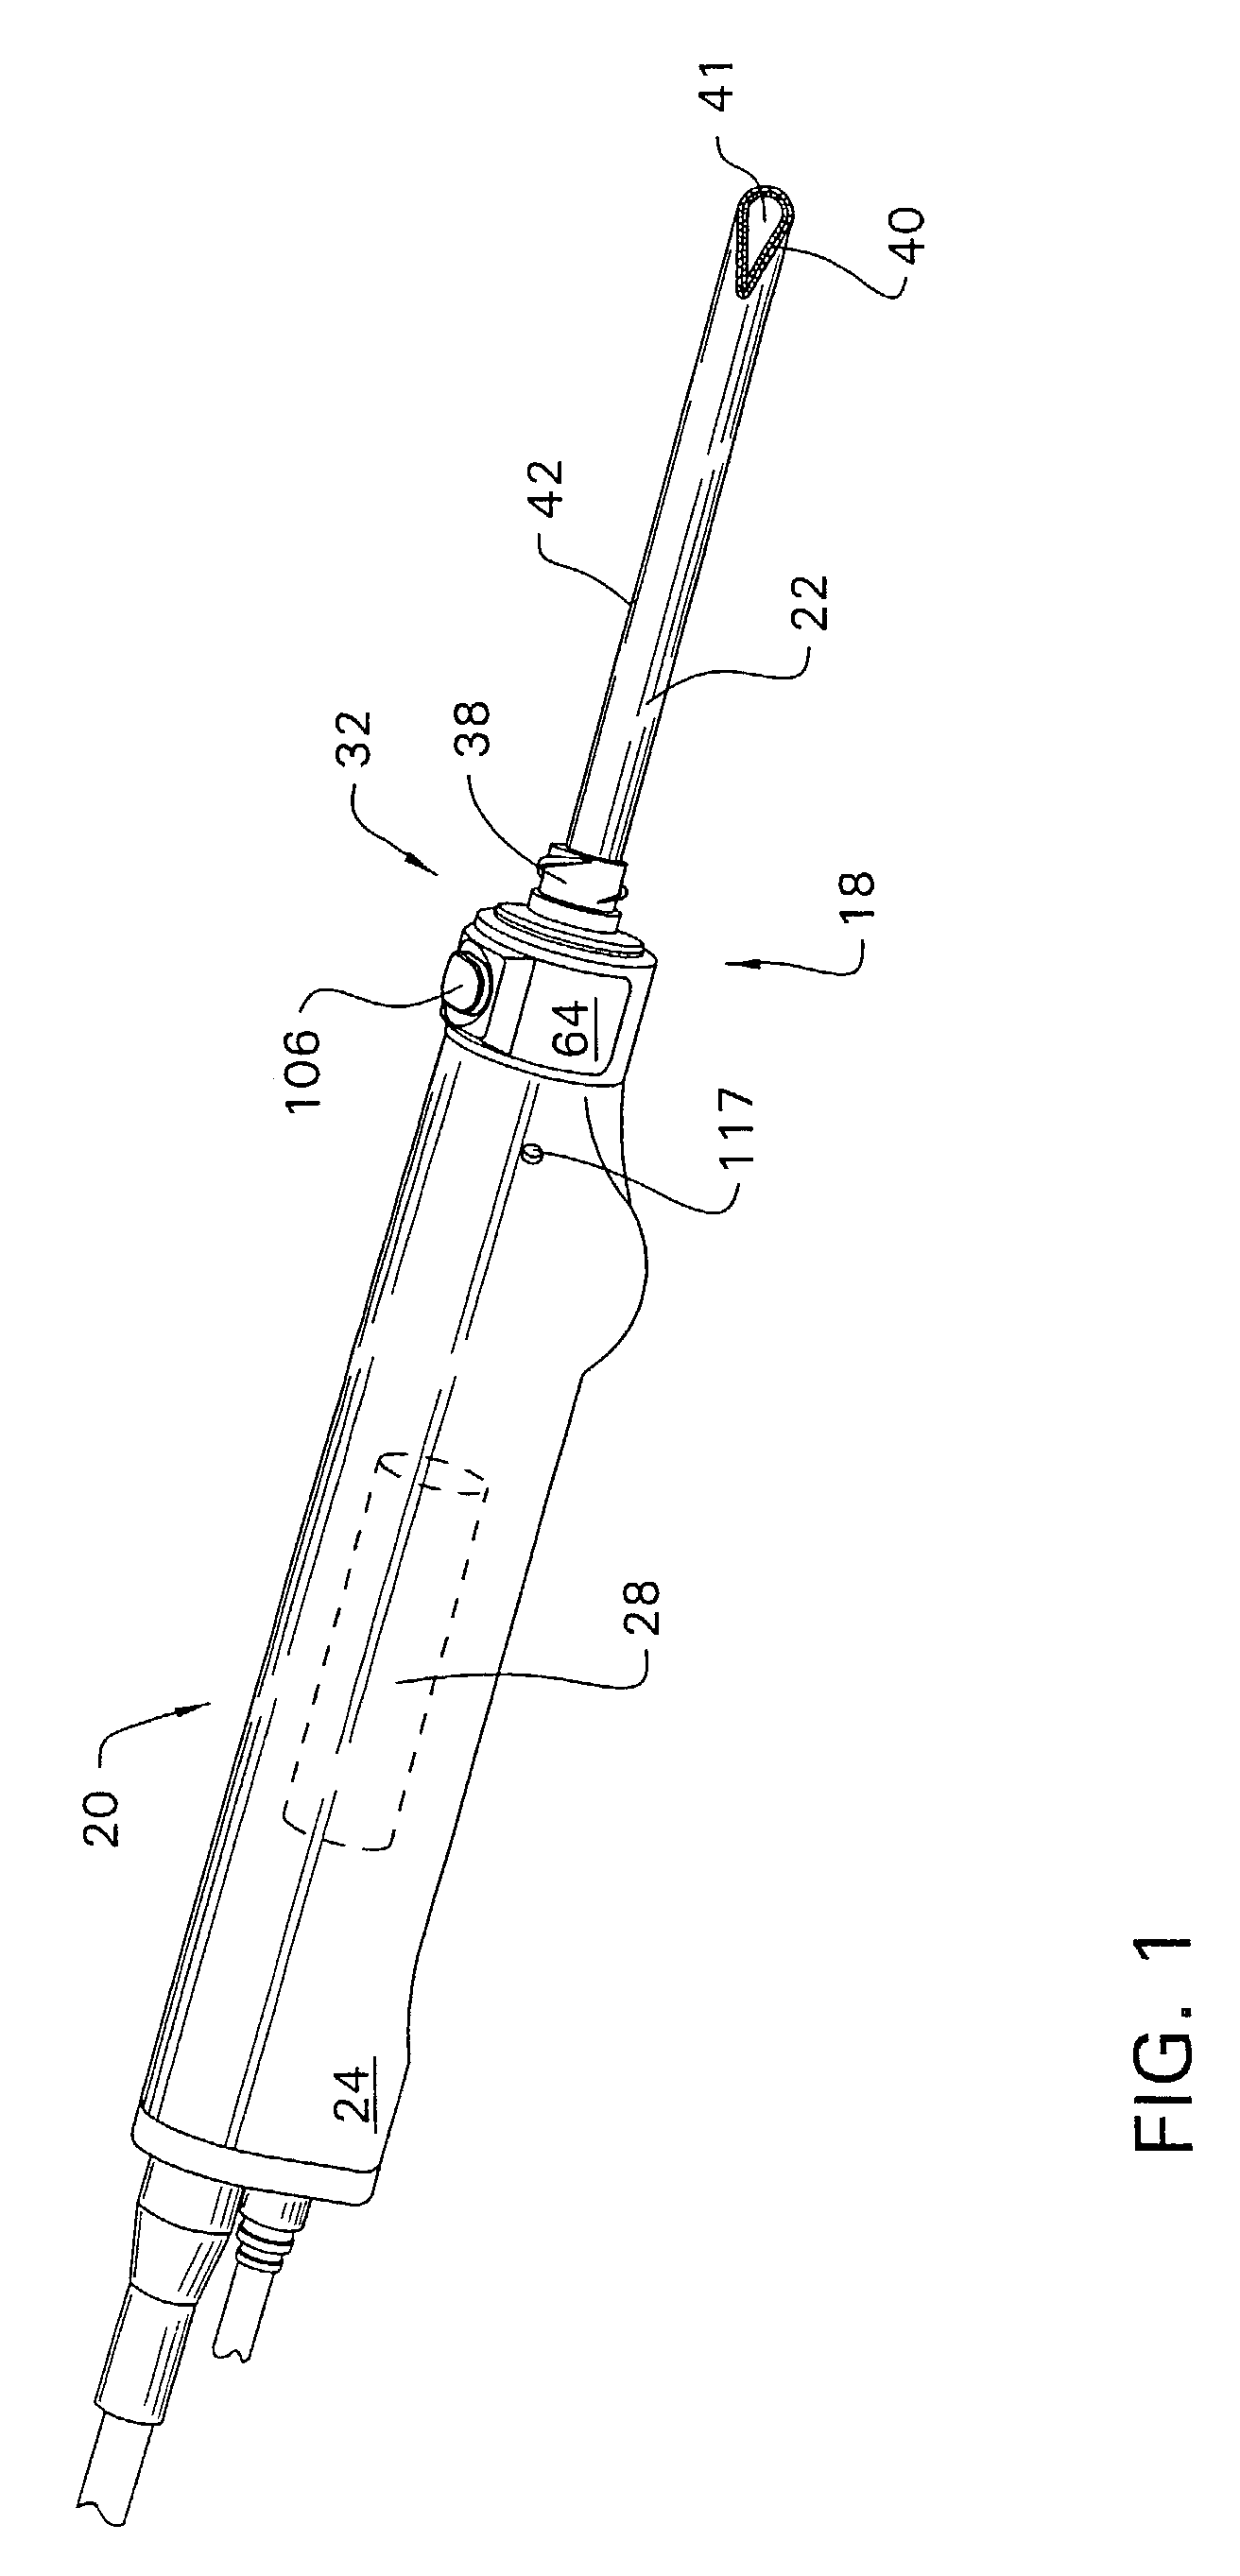 Surgical tool system with quick release coupling assembly